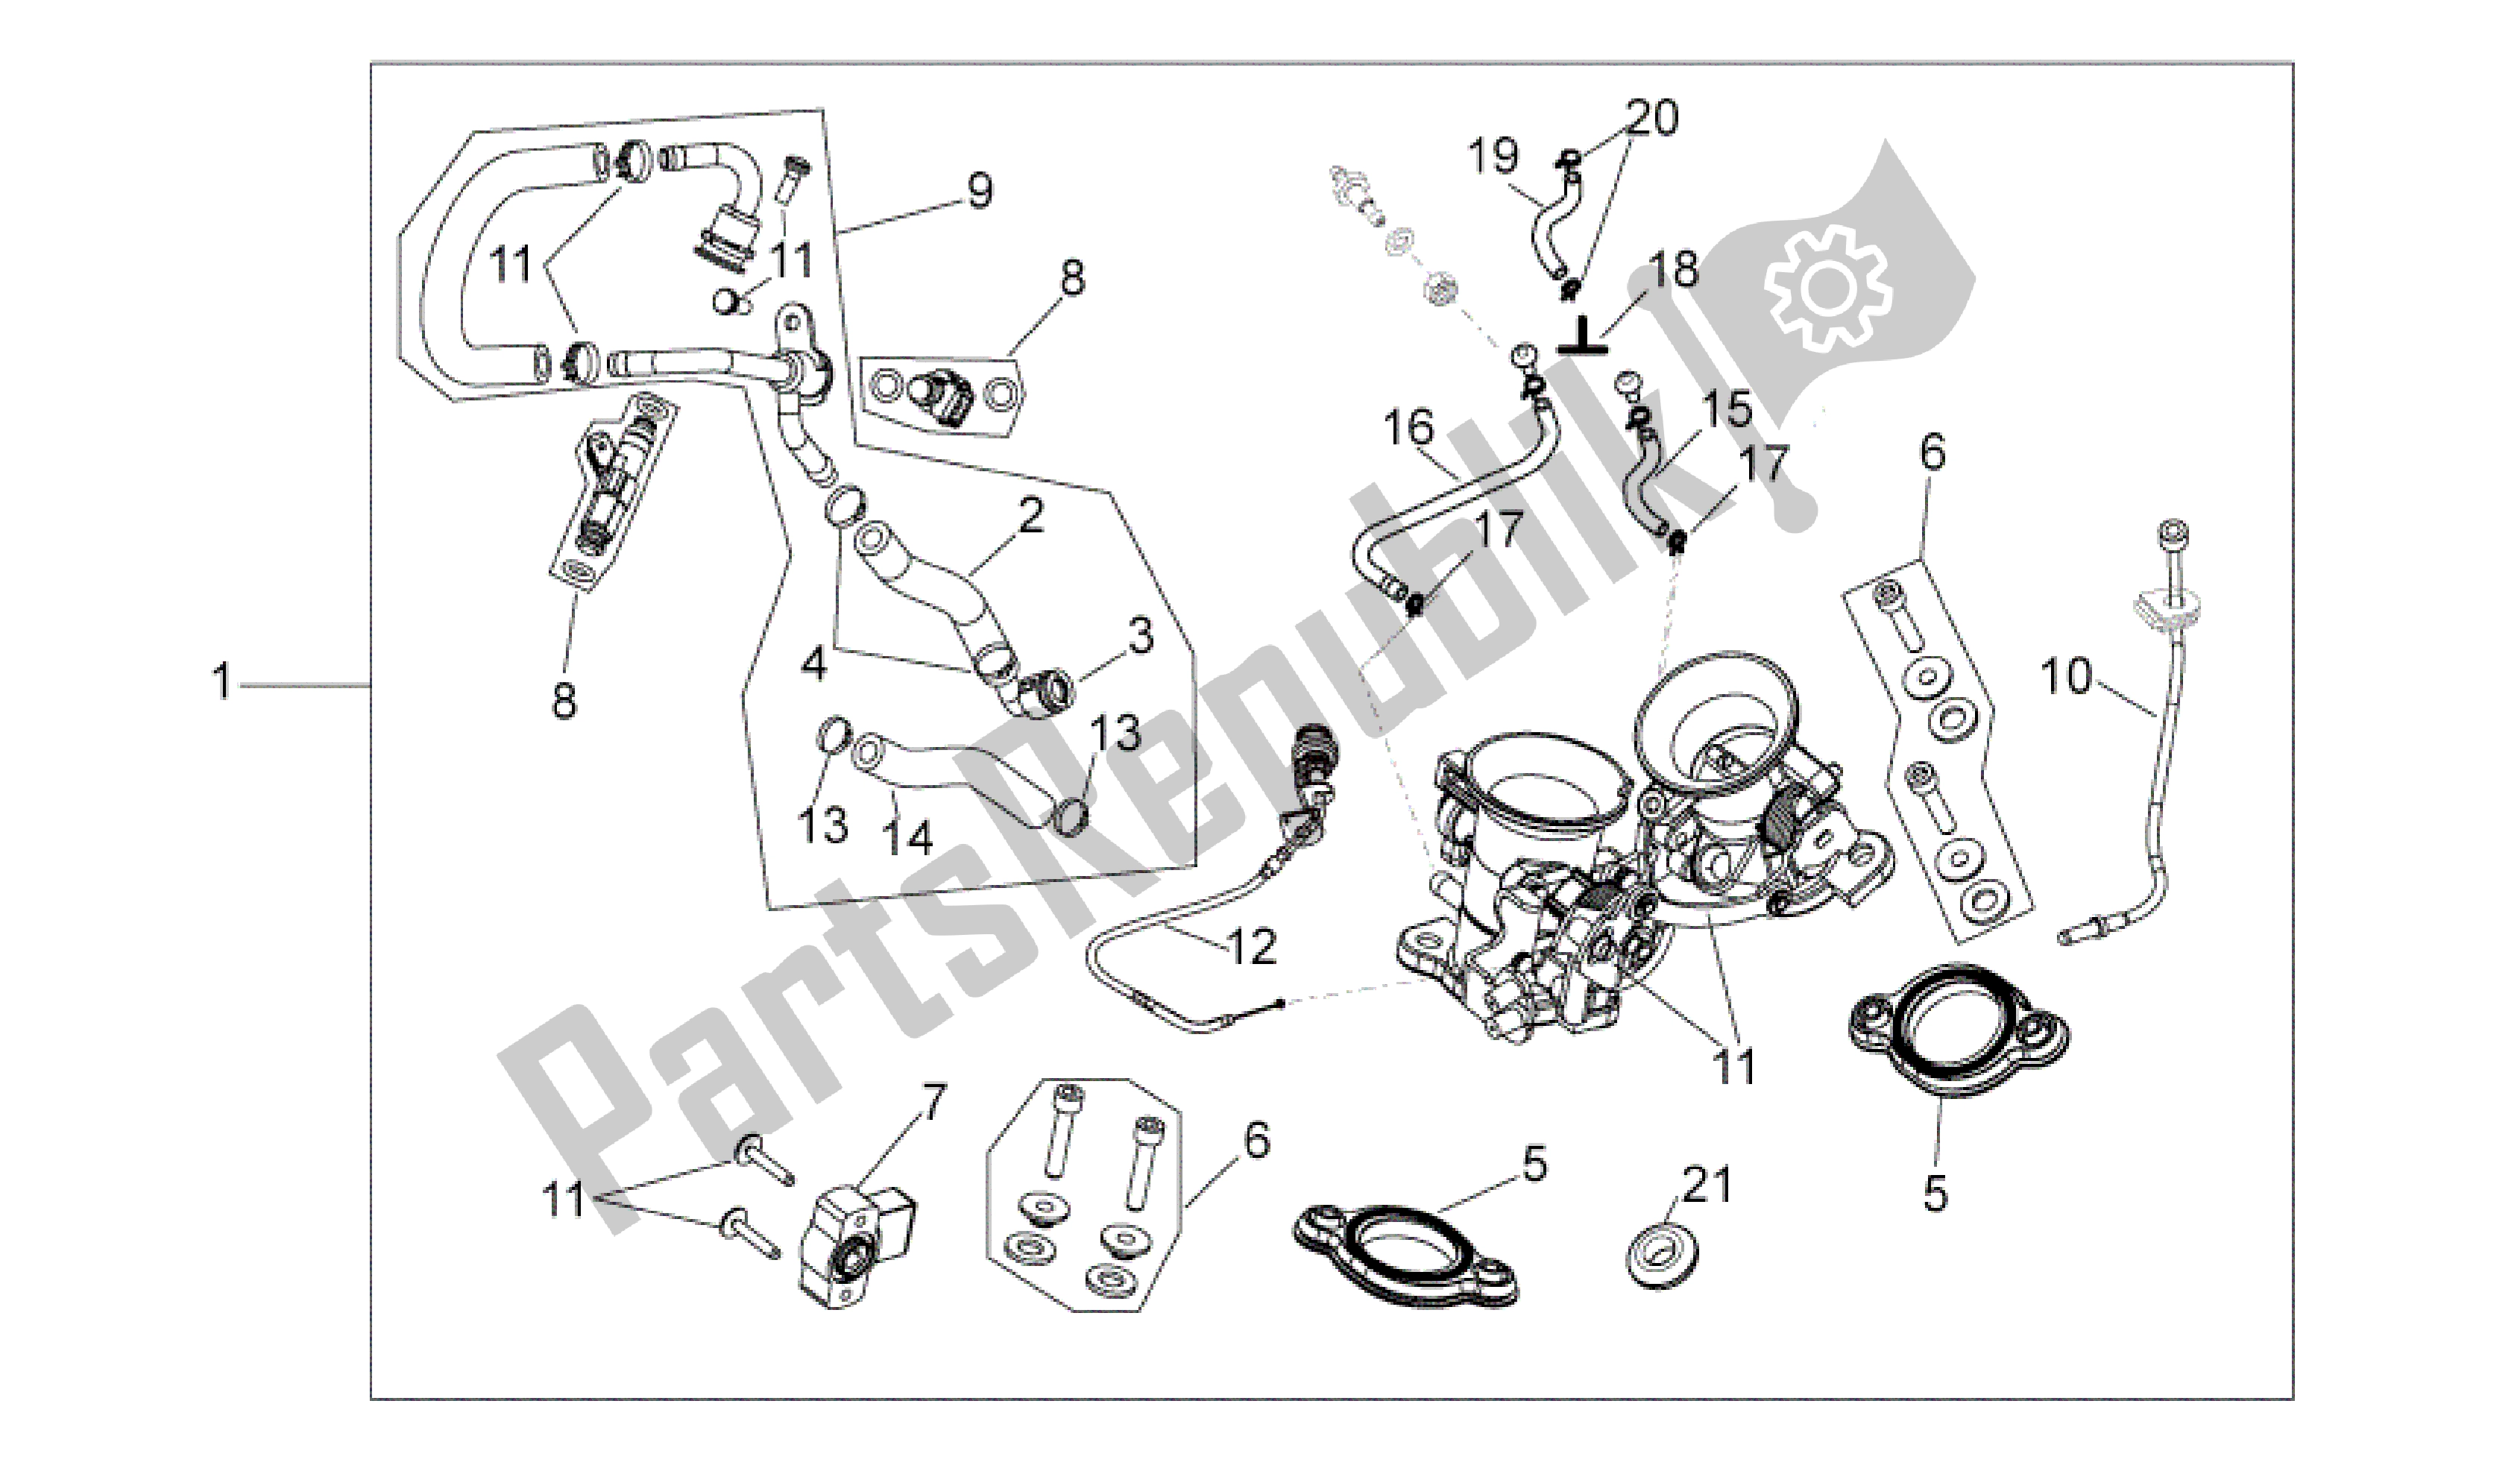 All parts for the Throttle Body of the Aprilia SXV 450 2009 - 2011